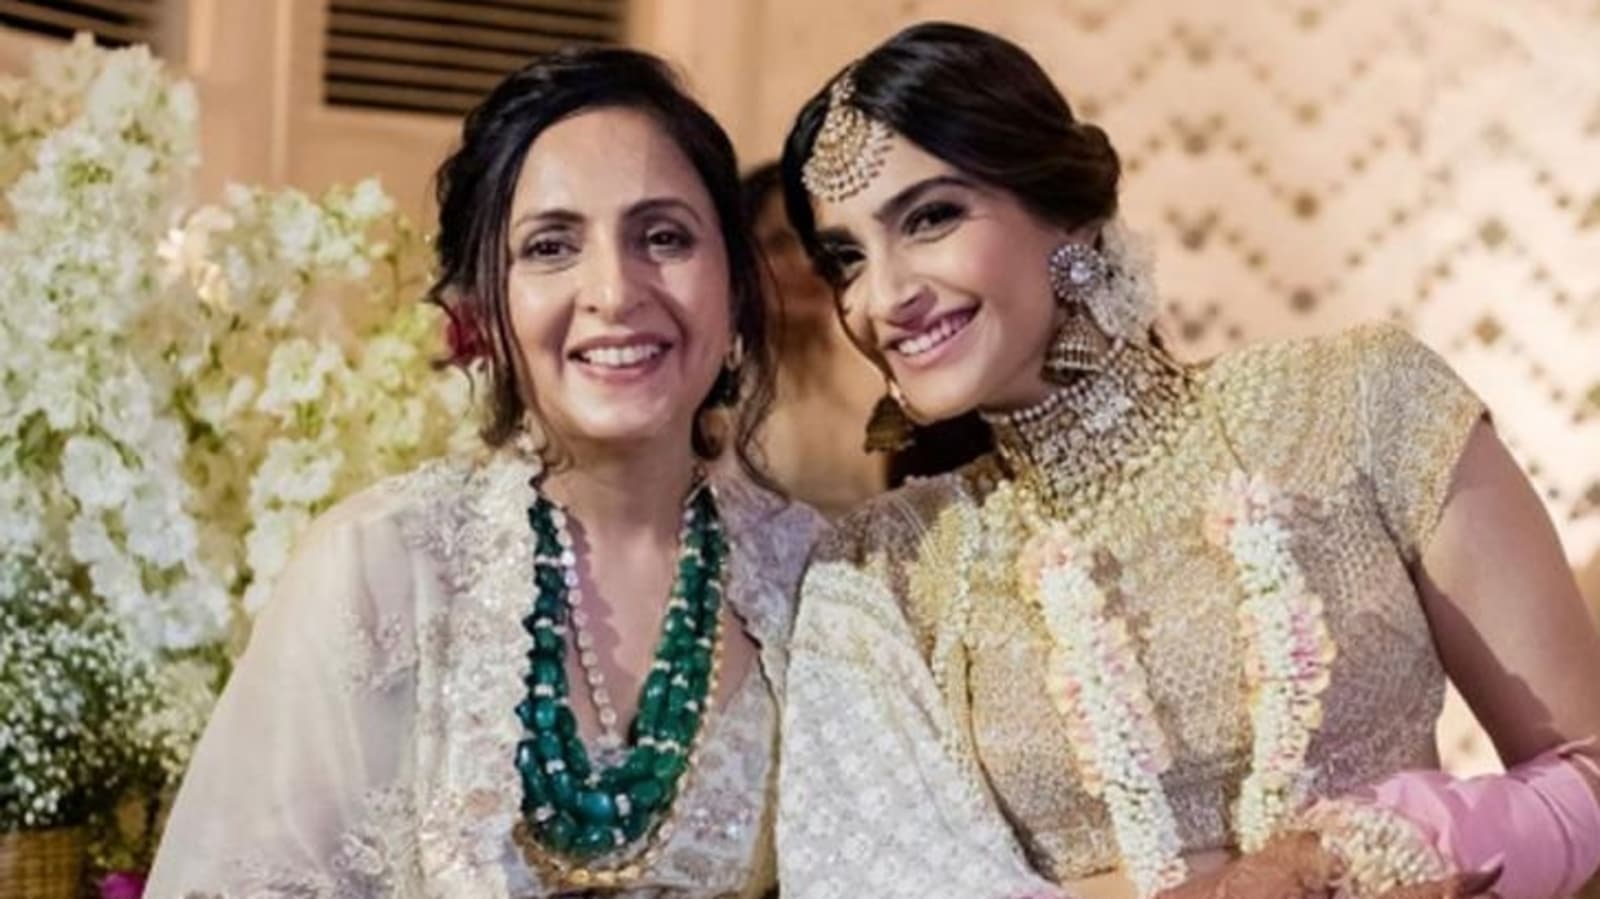 Sonam Kapoor Nangi Photo Xx Video - Sonam Kapoor's mother-in-law reacts to her pregnancy, shares post |  Bollywood - Hindustan Times